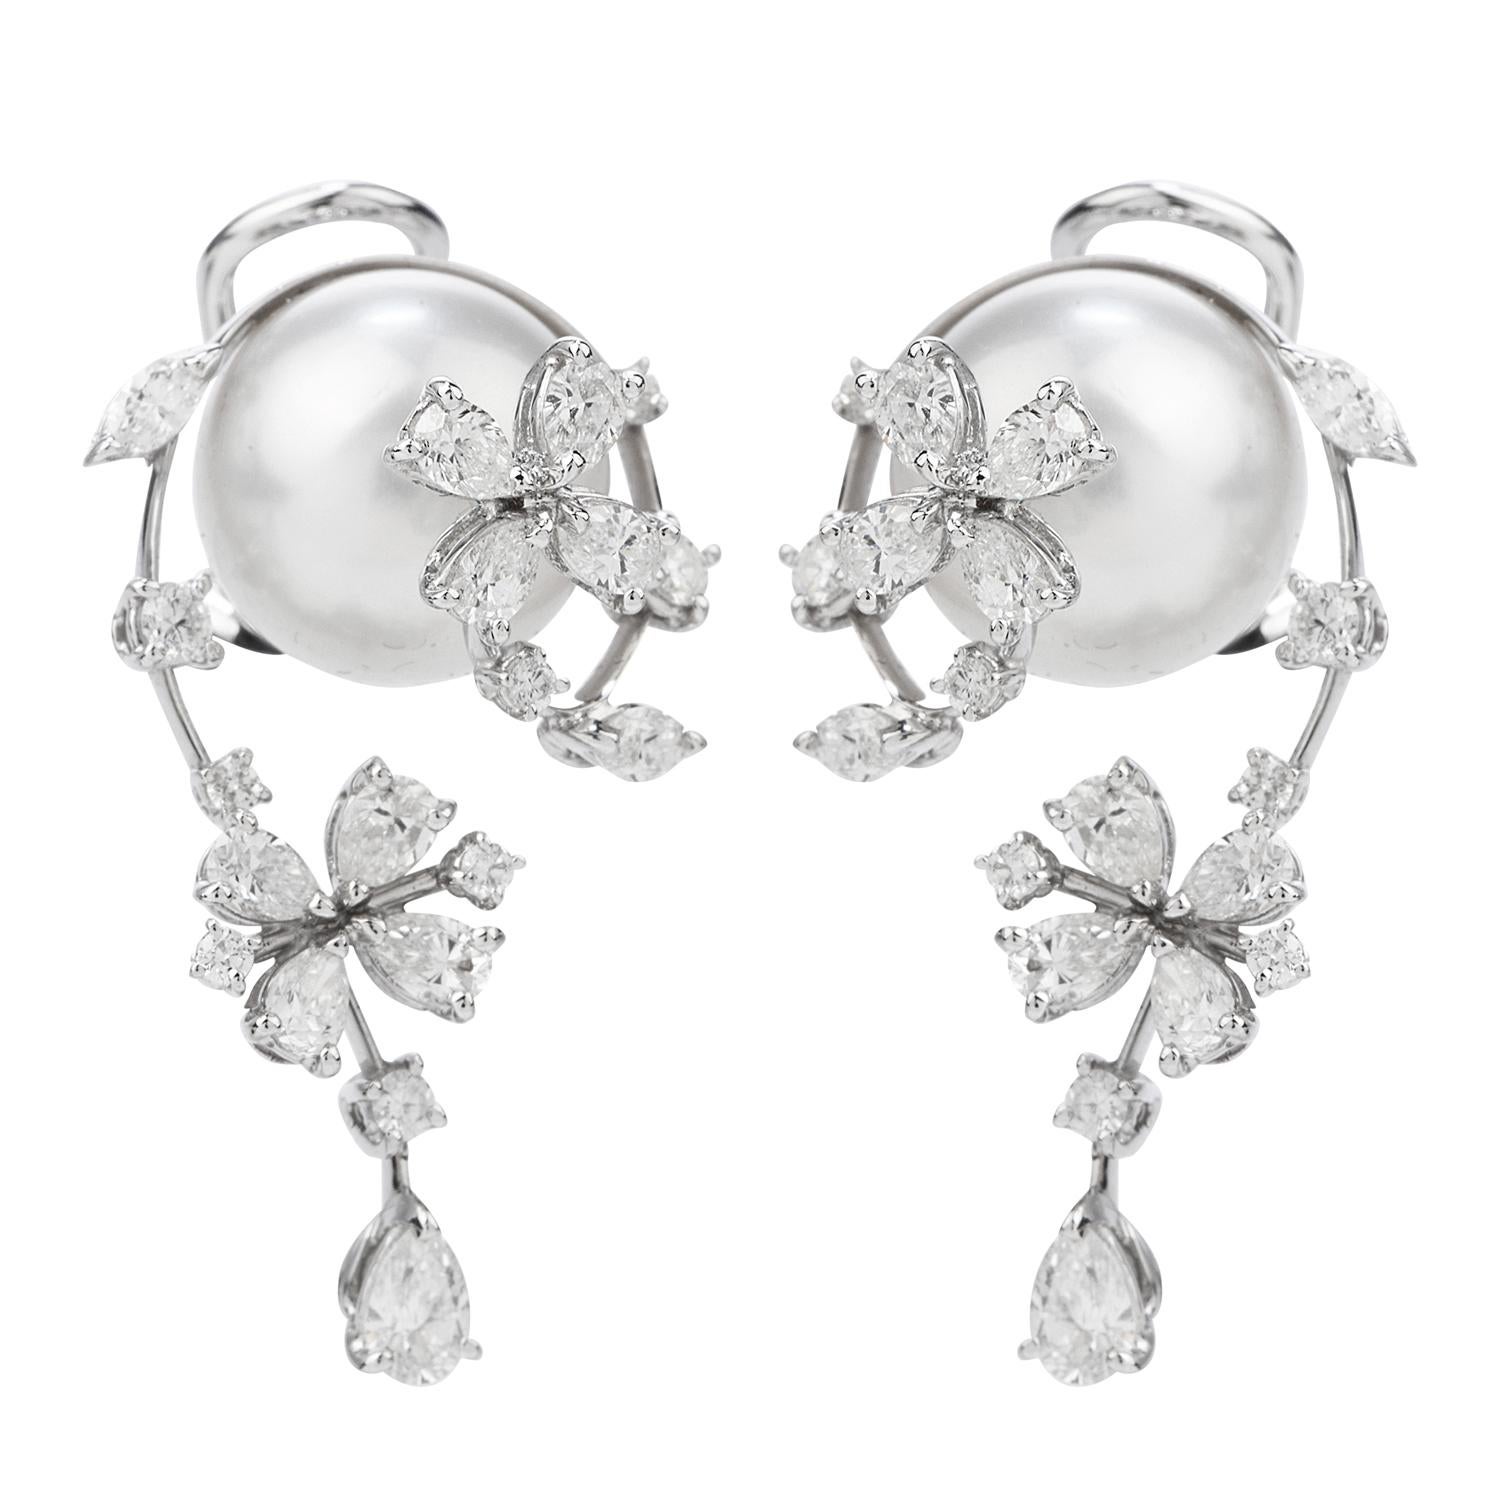 Presented by the acclaimed Designer Stefan Hefner, we are delighted to offer these exquisite and delicate Estate Earrings showcasing lustrous pearls adorned with brilliant diamonds.

A floral motif, with movable flower accents - crafted in 18K White